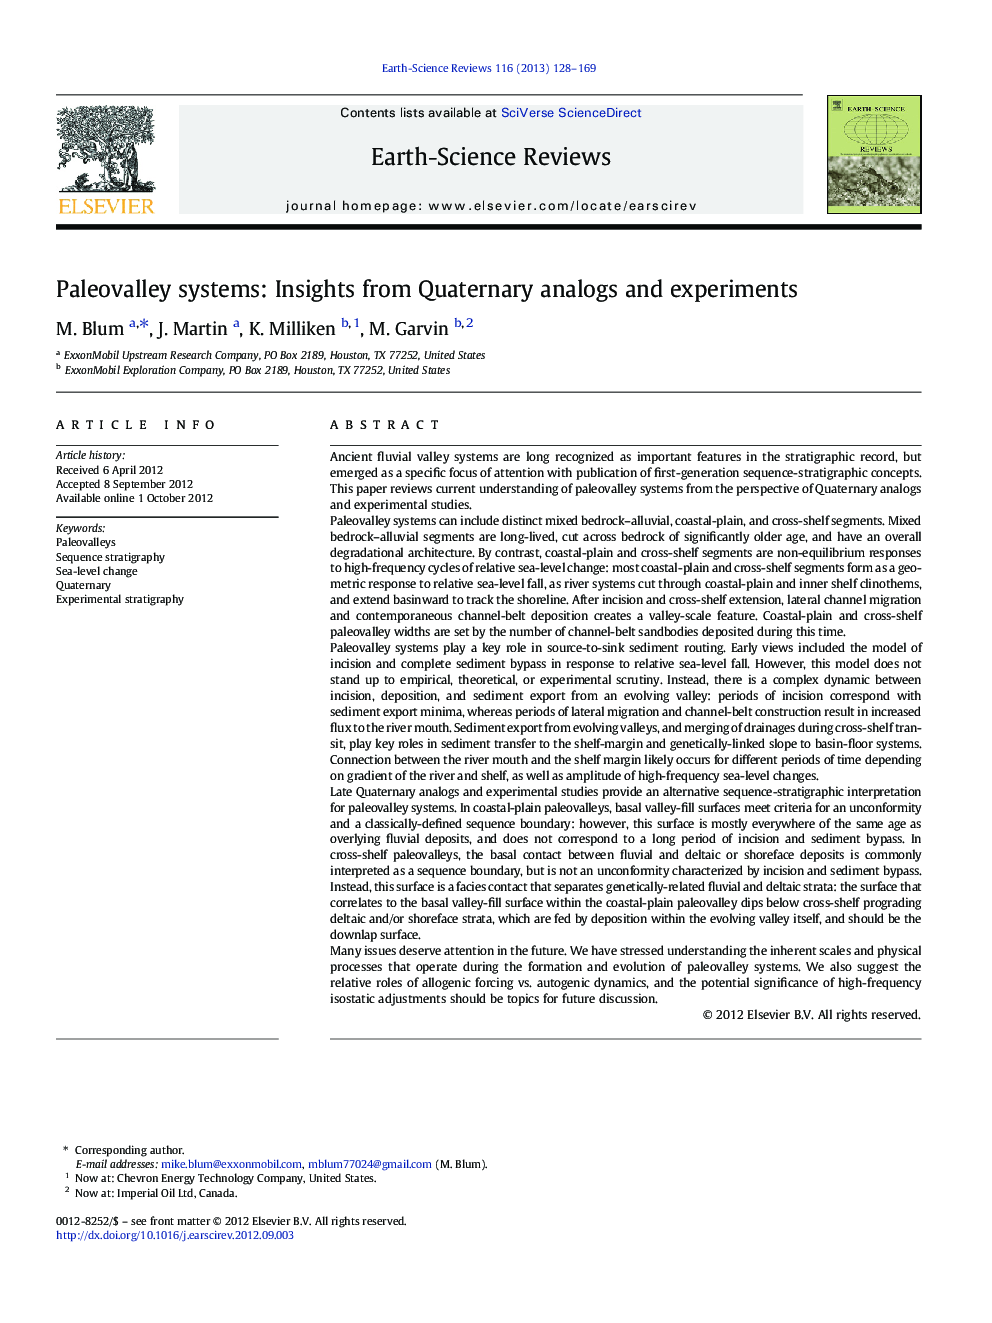 Paleovalley systems: Insights from Quaternary analogs and experiments